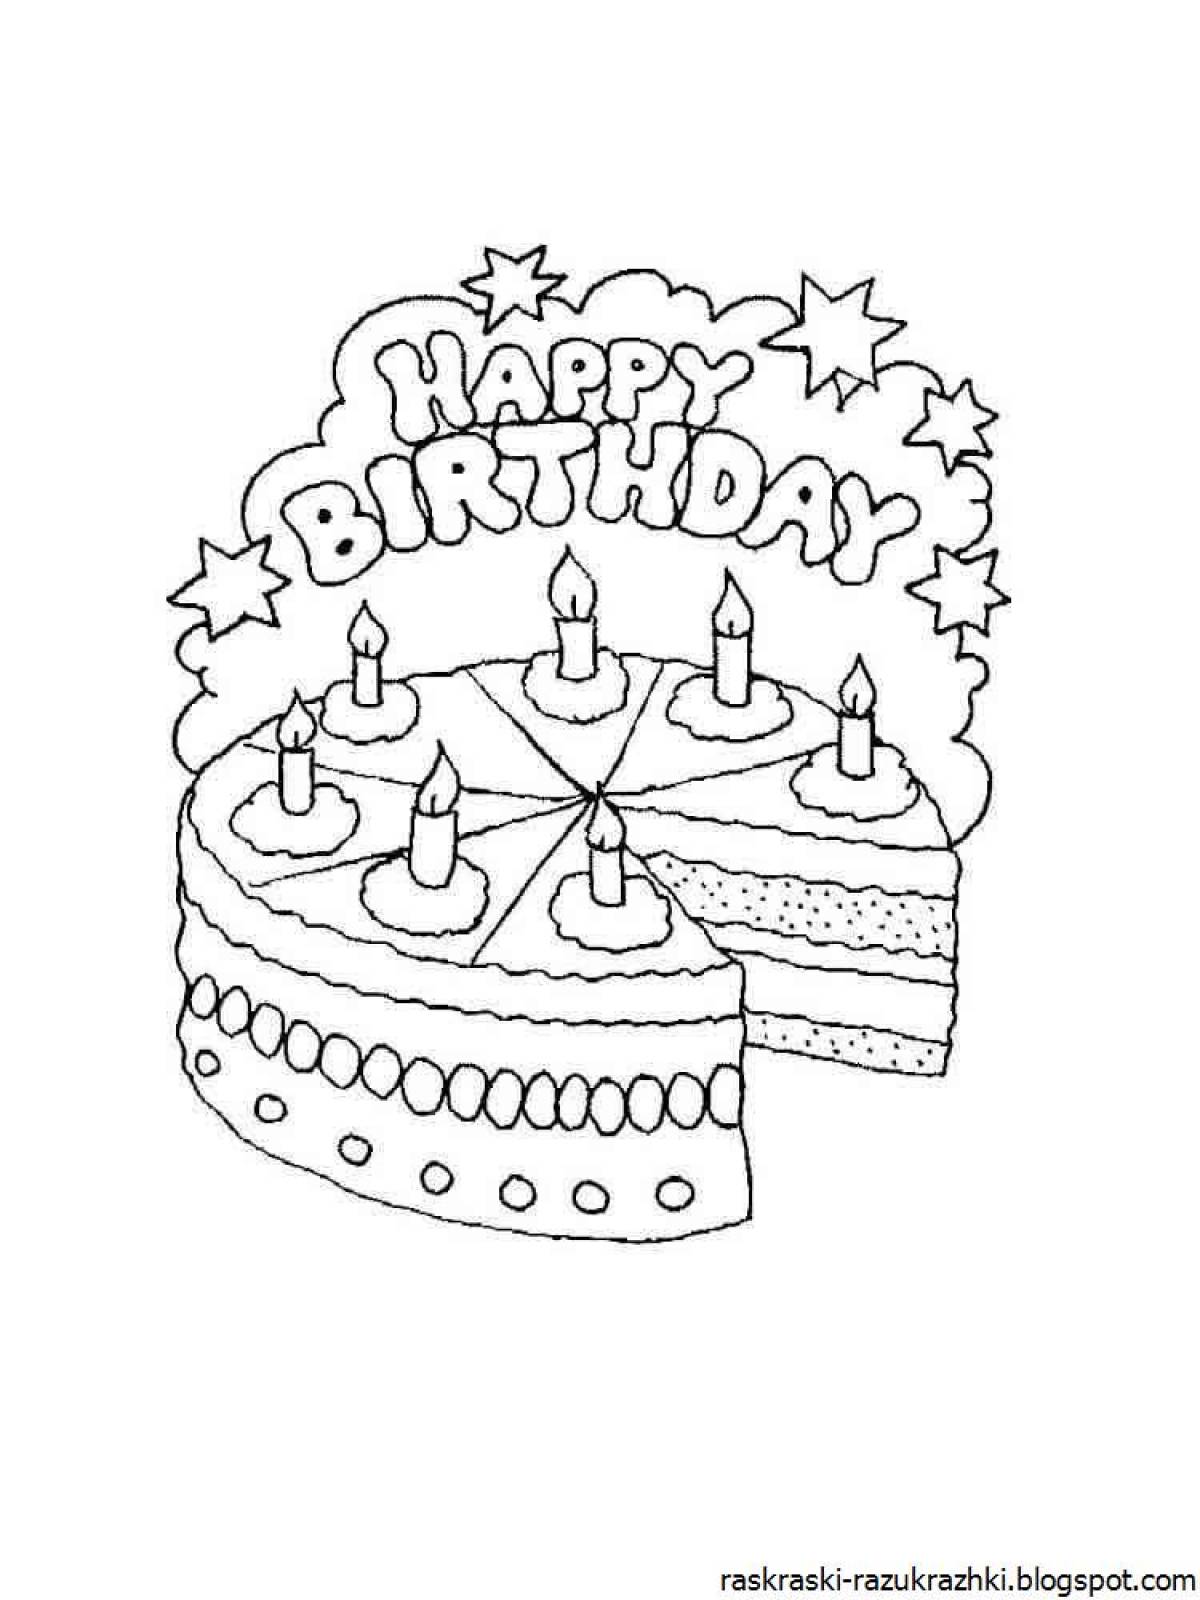 Coloring page happy birthday glamorous grandmother